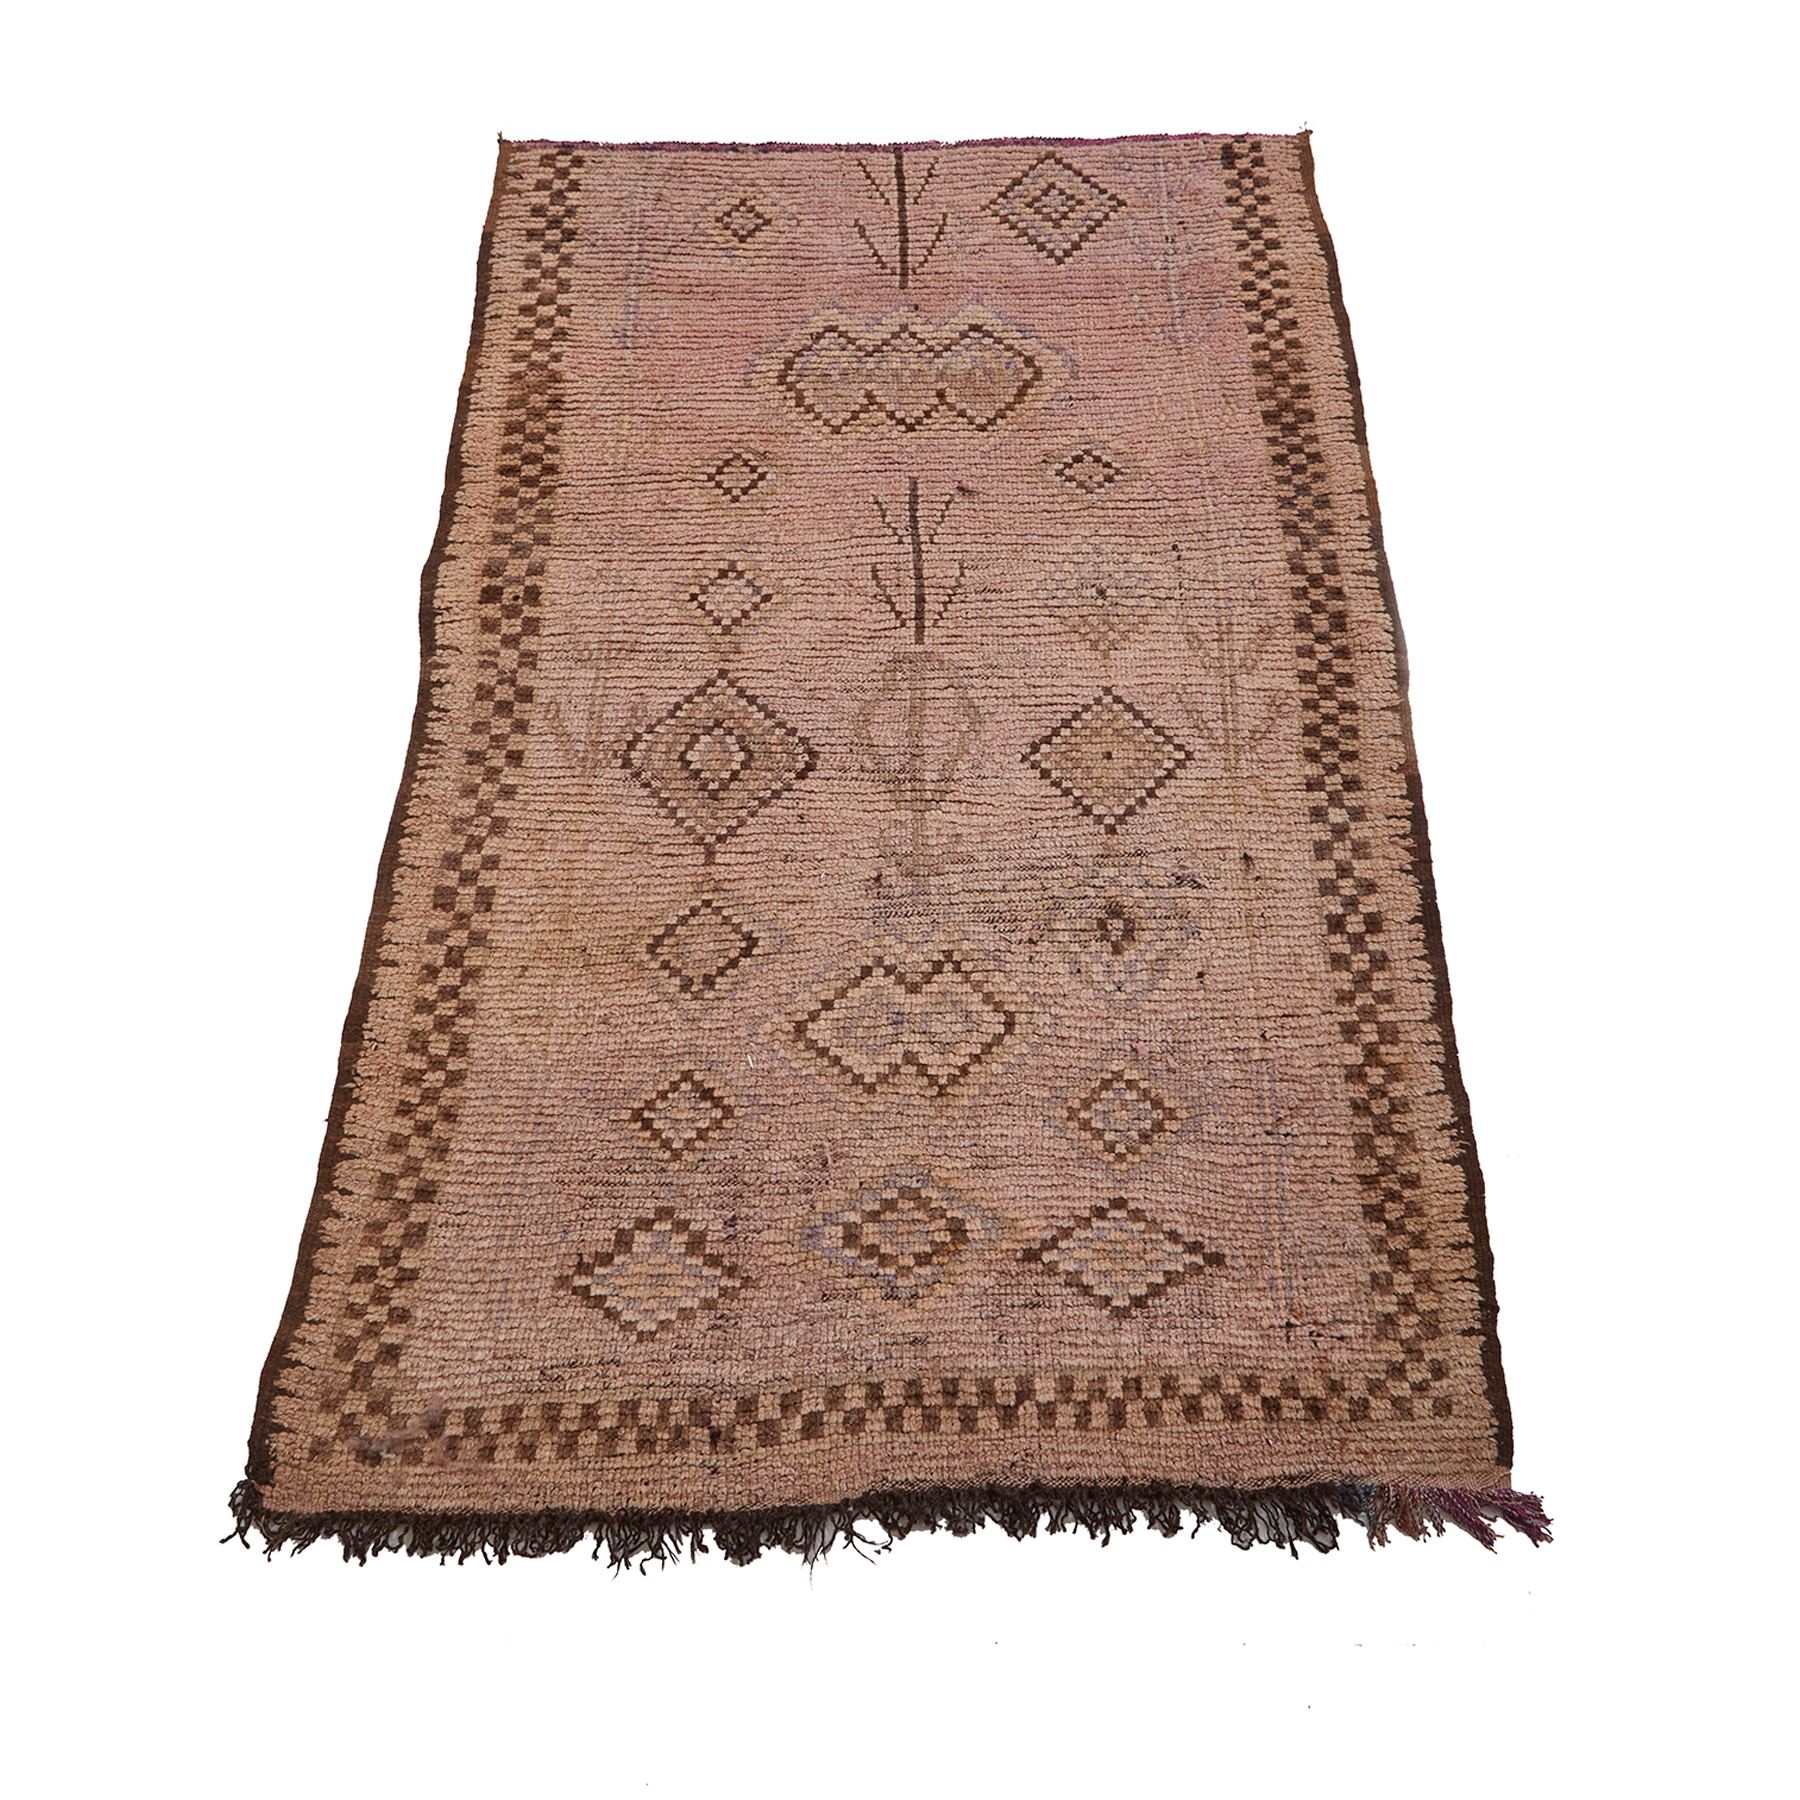 Checkerboard Moroccan rug in brown and neutral tones with diamond abstract designs